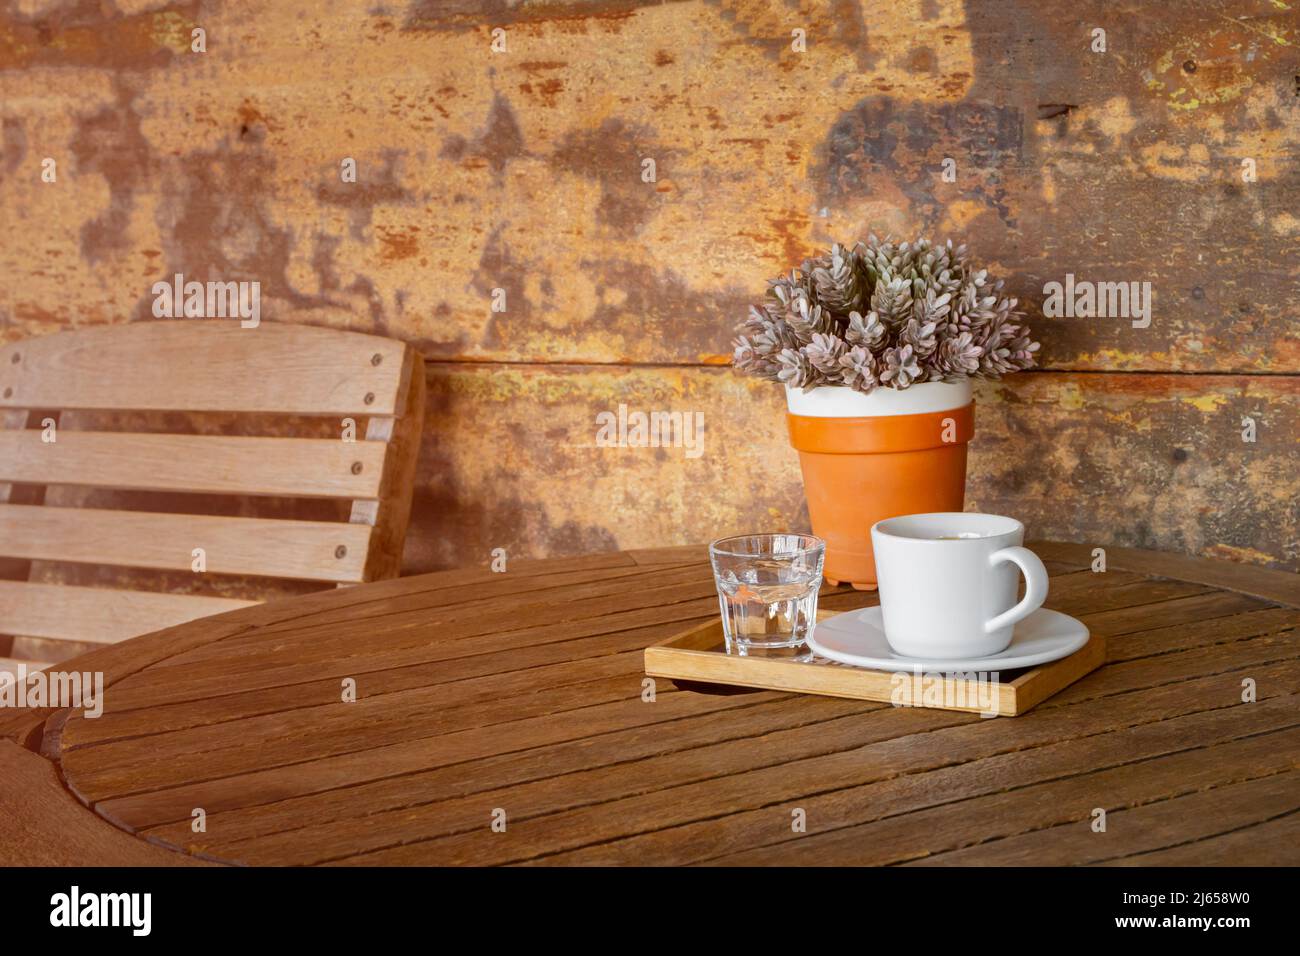 white coffee cup and glass of water on vintage wooden table and flower pot Stock Photo